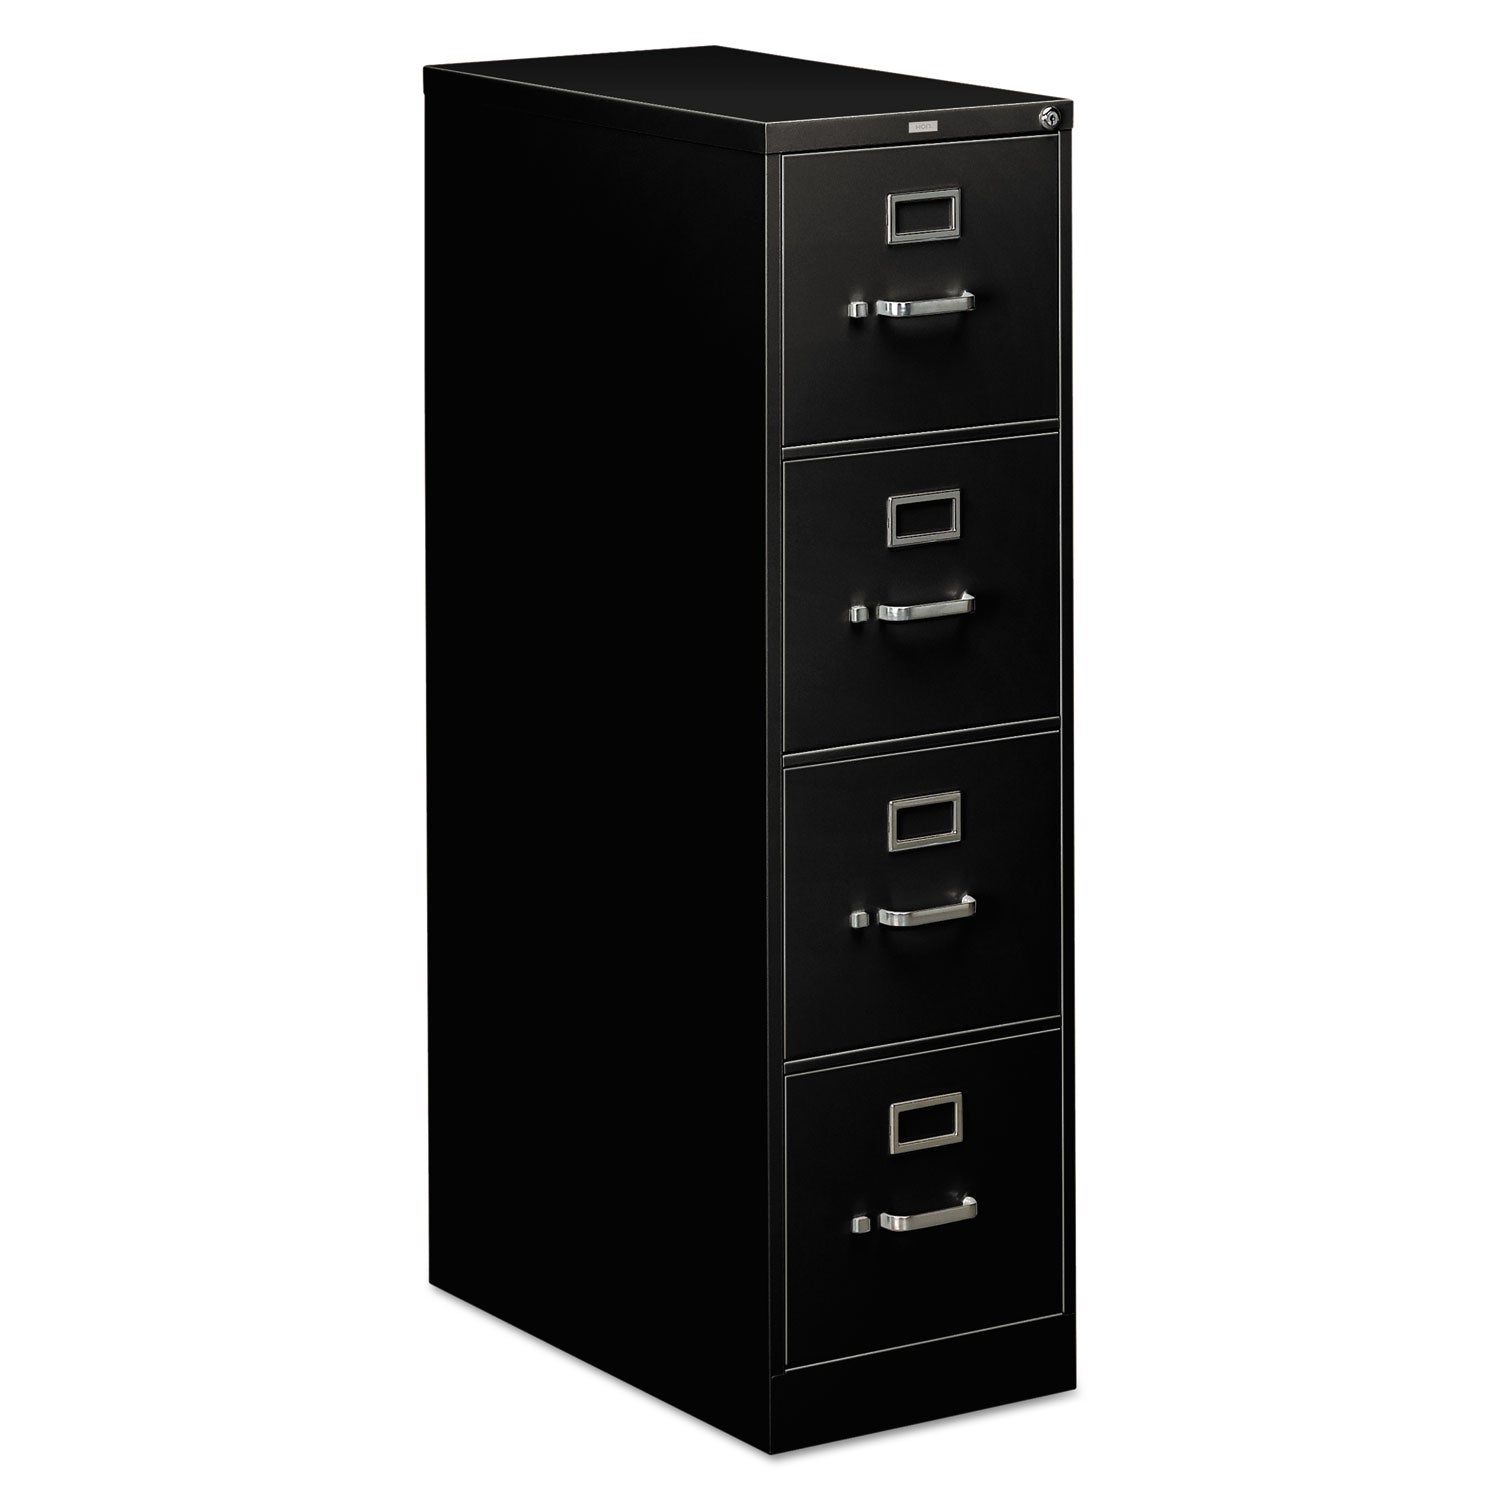 310 Series Vertical File, 4 Letter-Size File Drawers, Black, 15" x 26.5" x 52 - 